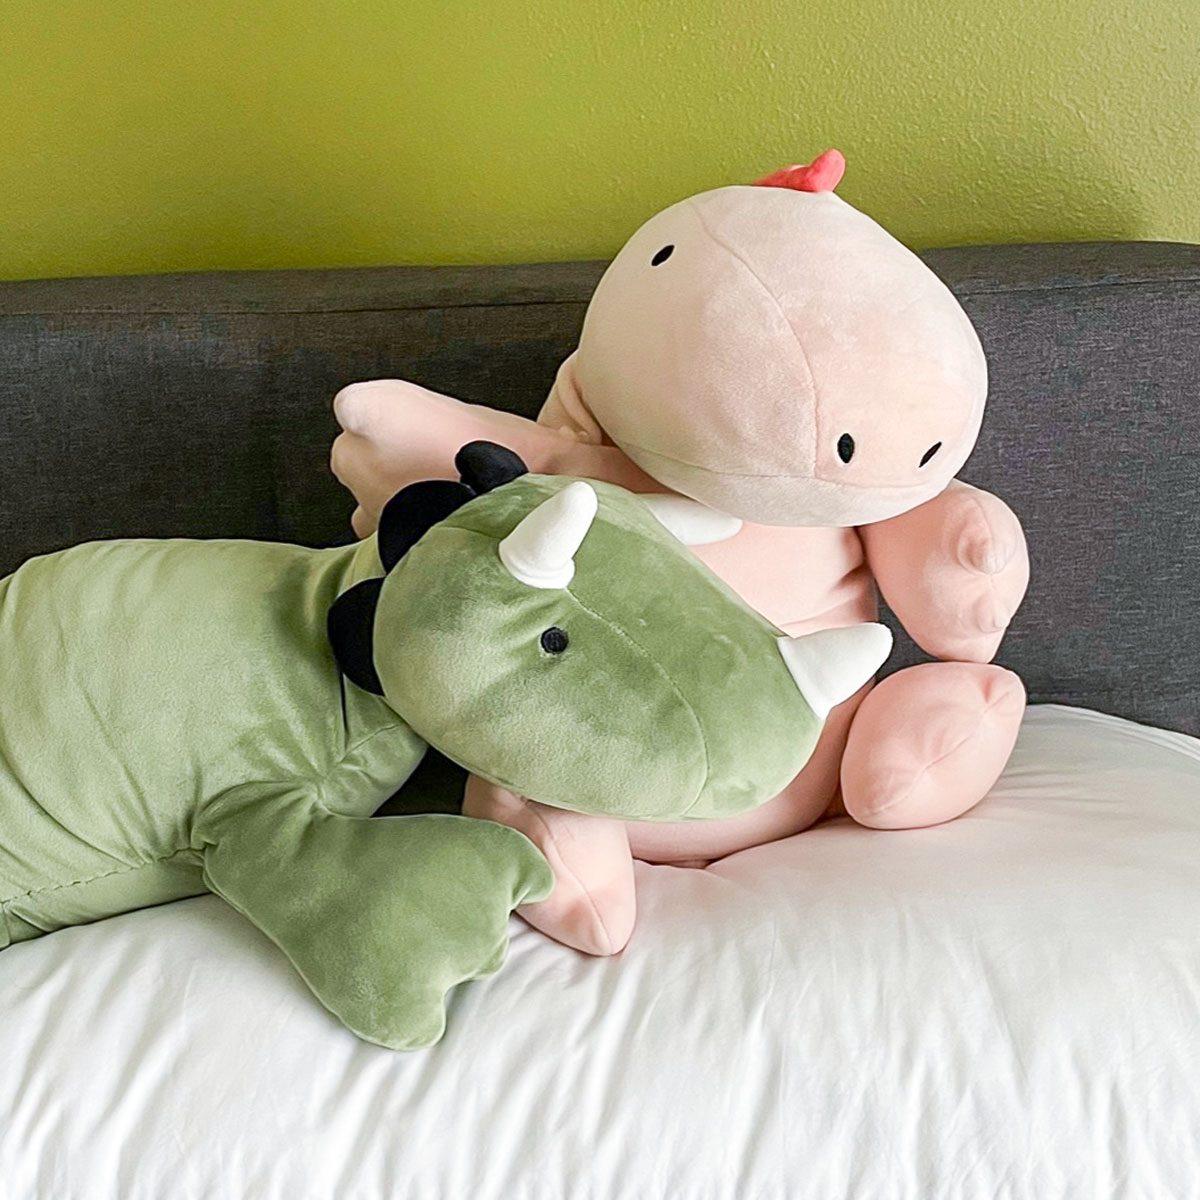 Pillowfort plush weighted dinosaurs on bed